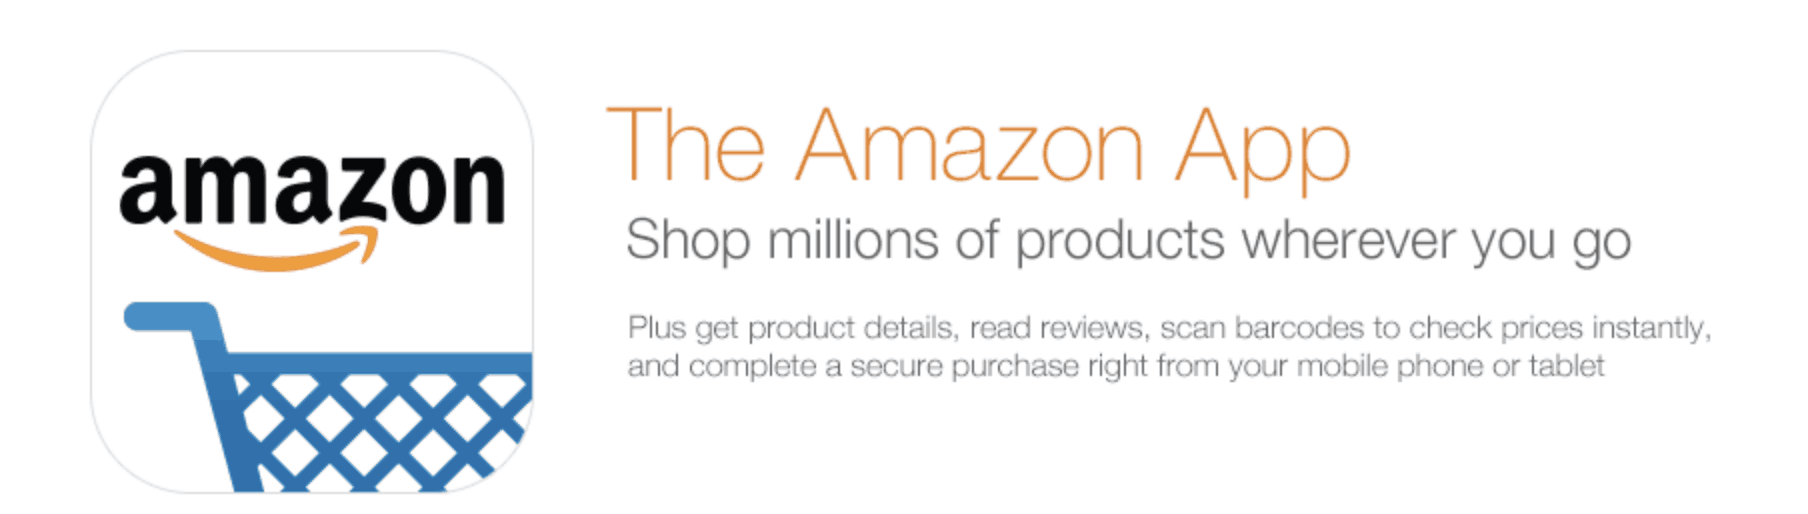 Download the Amazon App for more deals, compare prices as well as add items to your watch list!